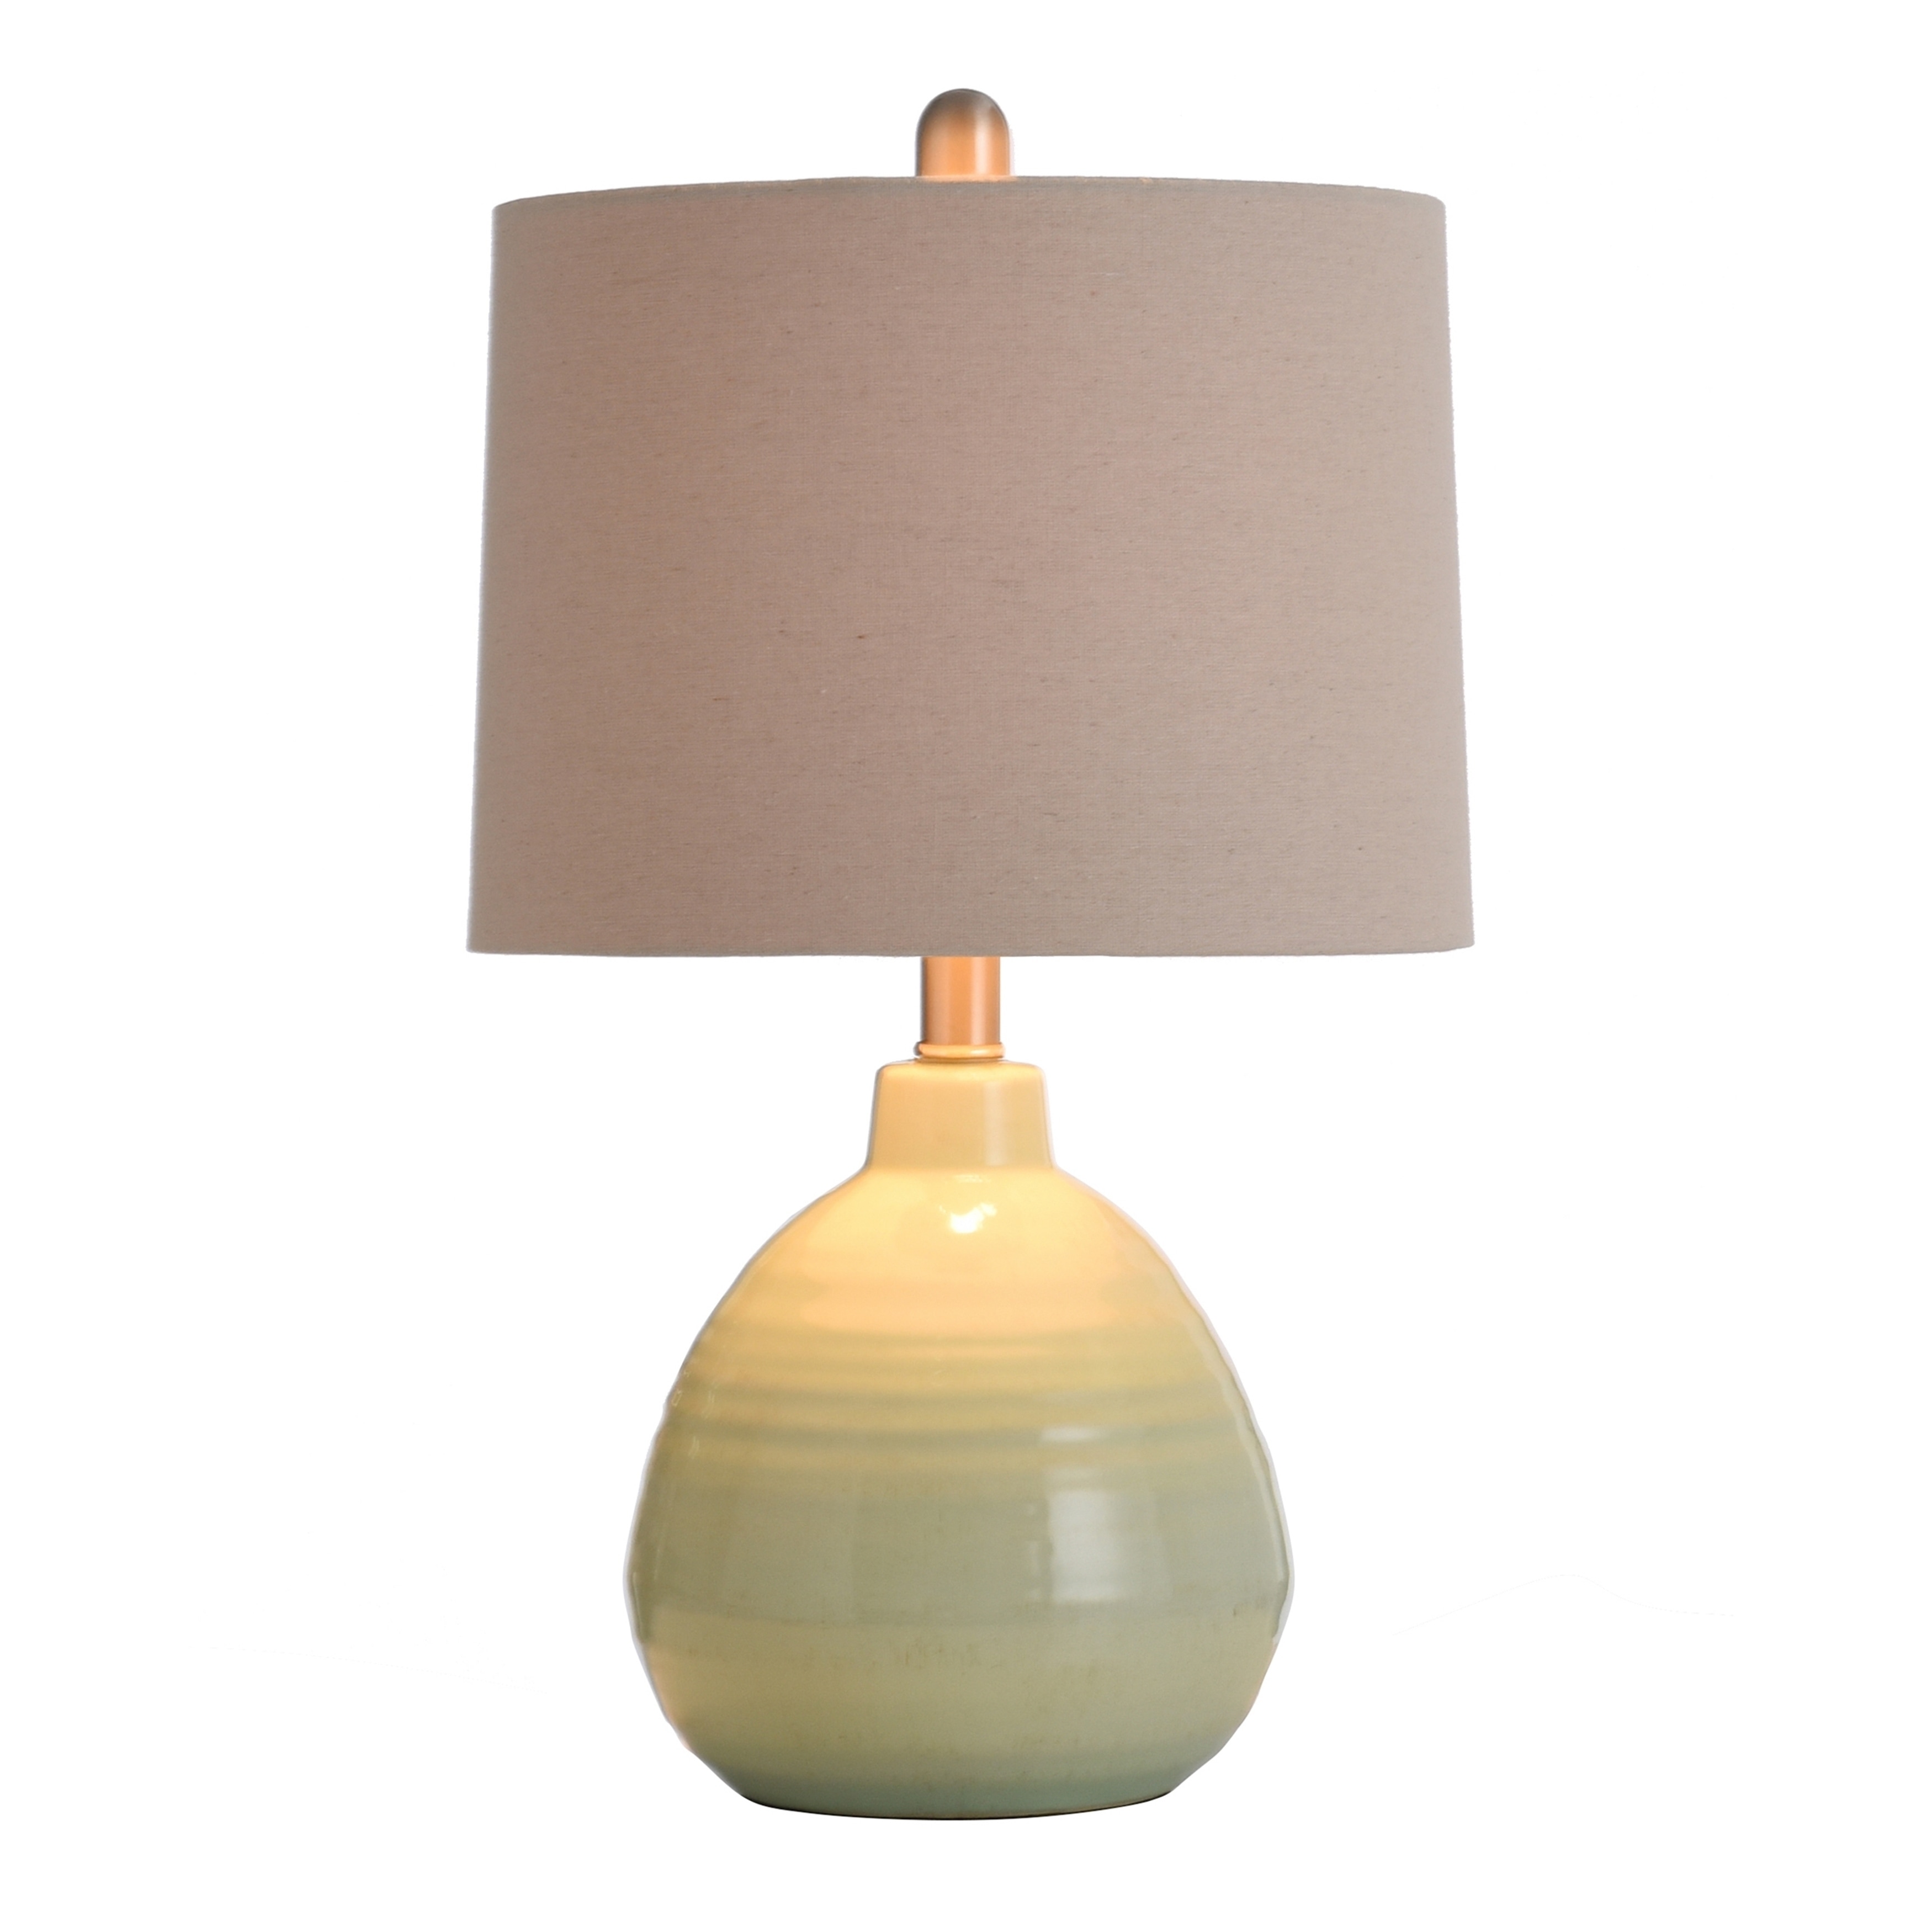 lime green table lamp shade